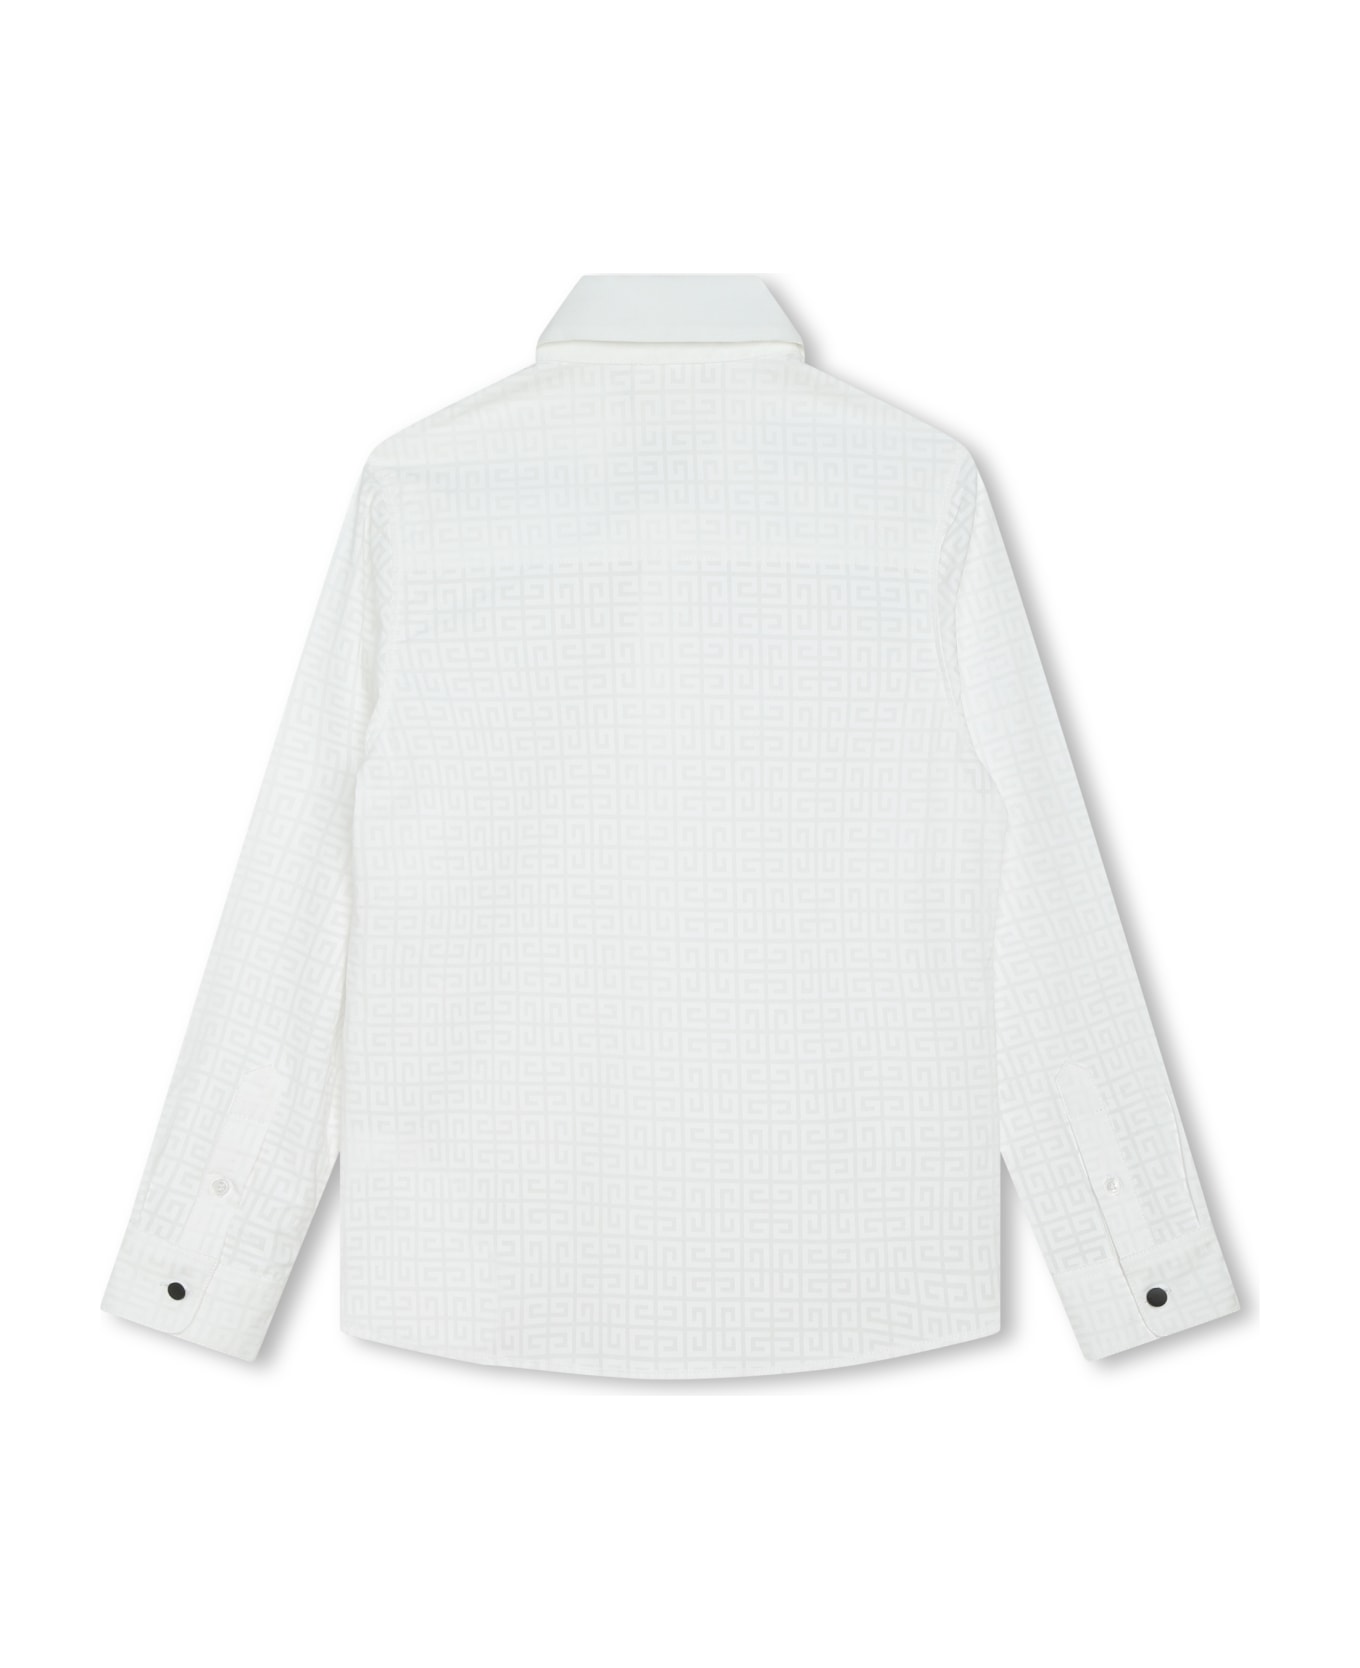 Givenchy Shirt With 4g Motif - White シャツ